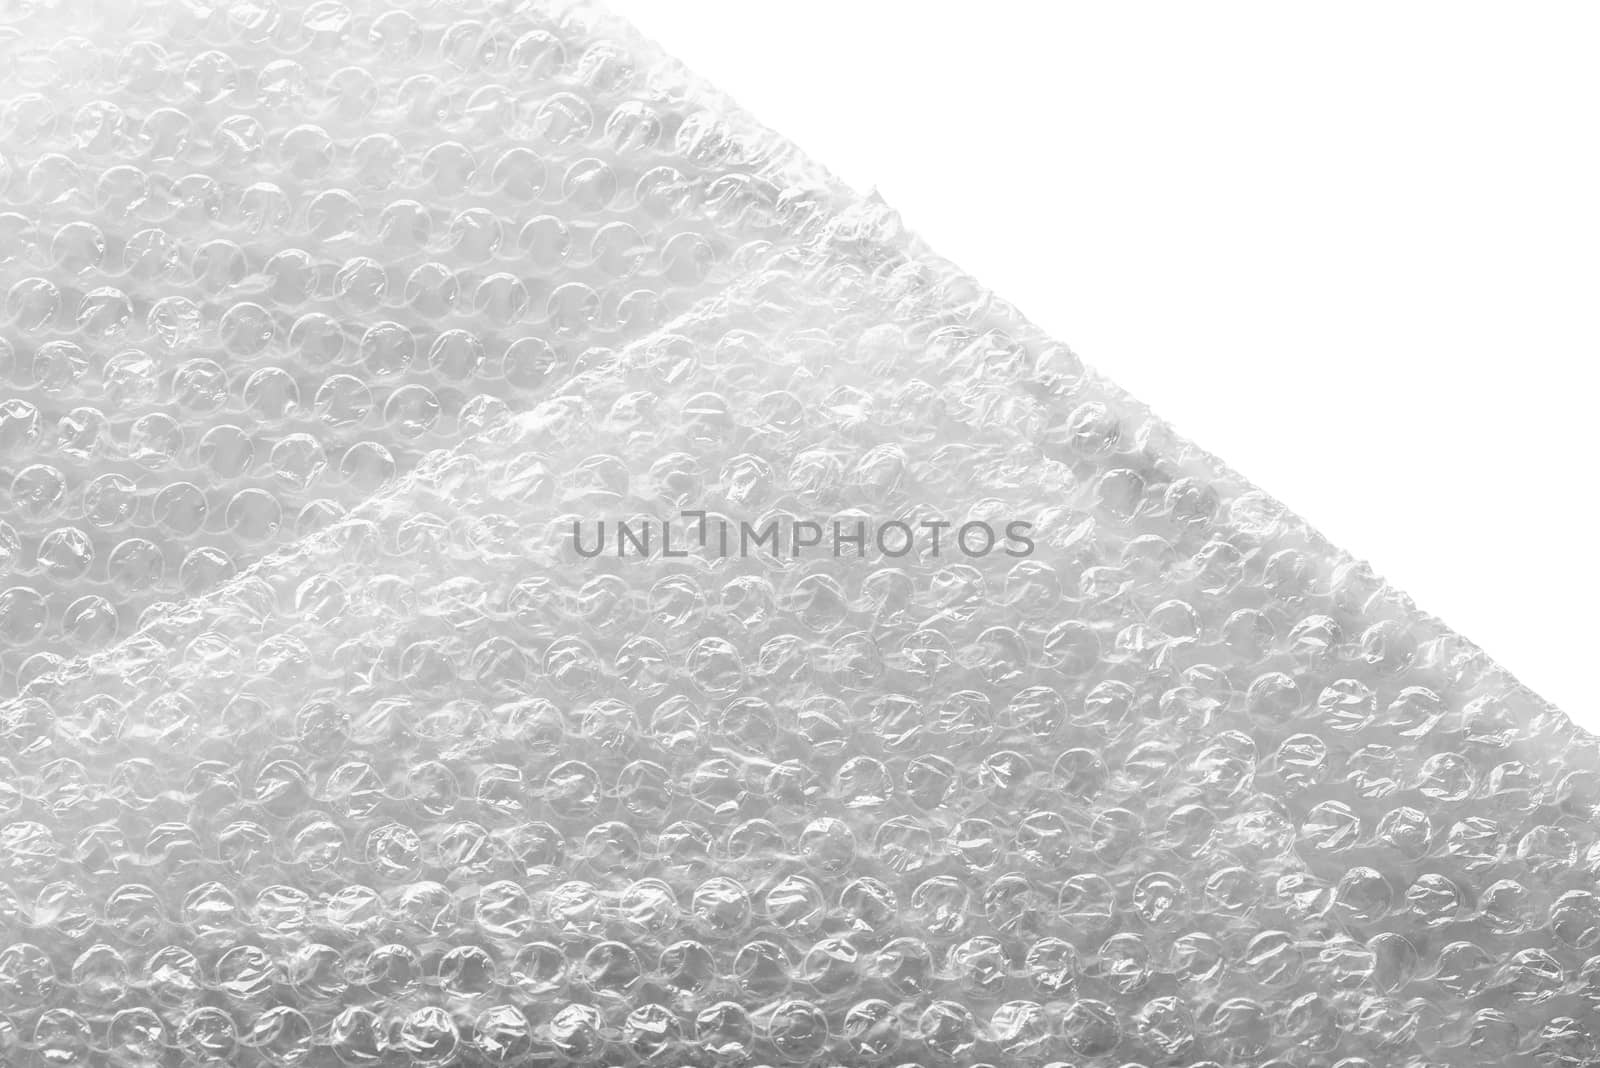 Bubble wrap material for a safety packing, isolated on white background. Abstract texture.